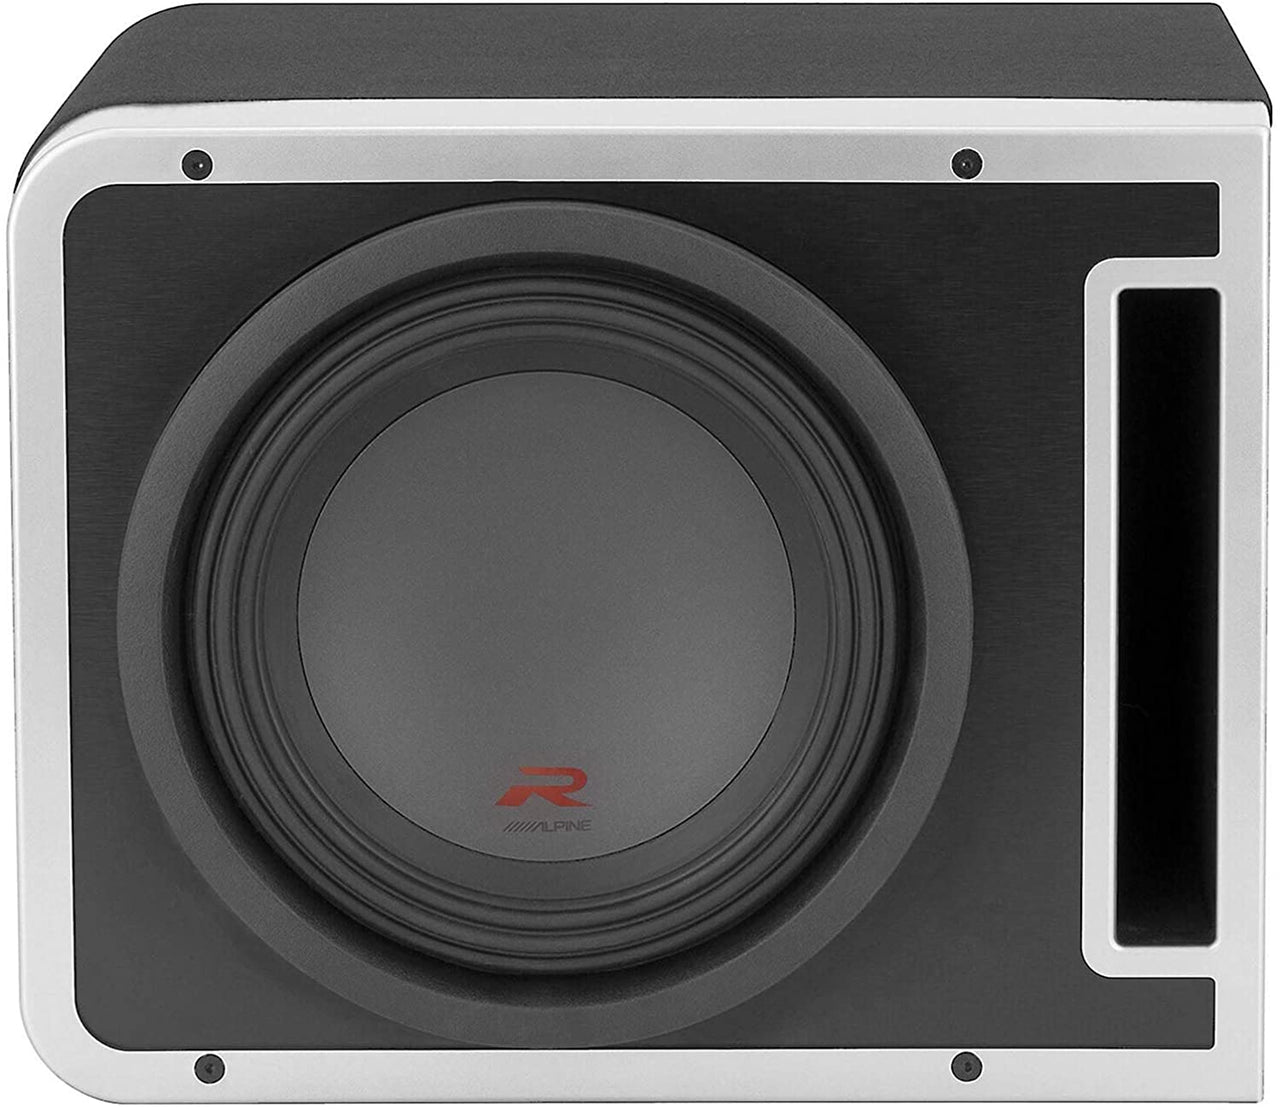 Alpine R-SB10V R-75M KIT4 R-SB10V Pre-Loaded R-Series 10-inch Subwoofer Enclosure, R-A75M 750 Watt Mono Amplifier, and 4 Gage Amp Wiring Kit